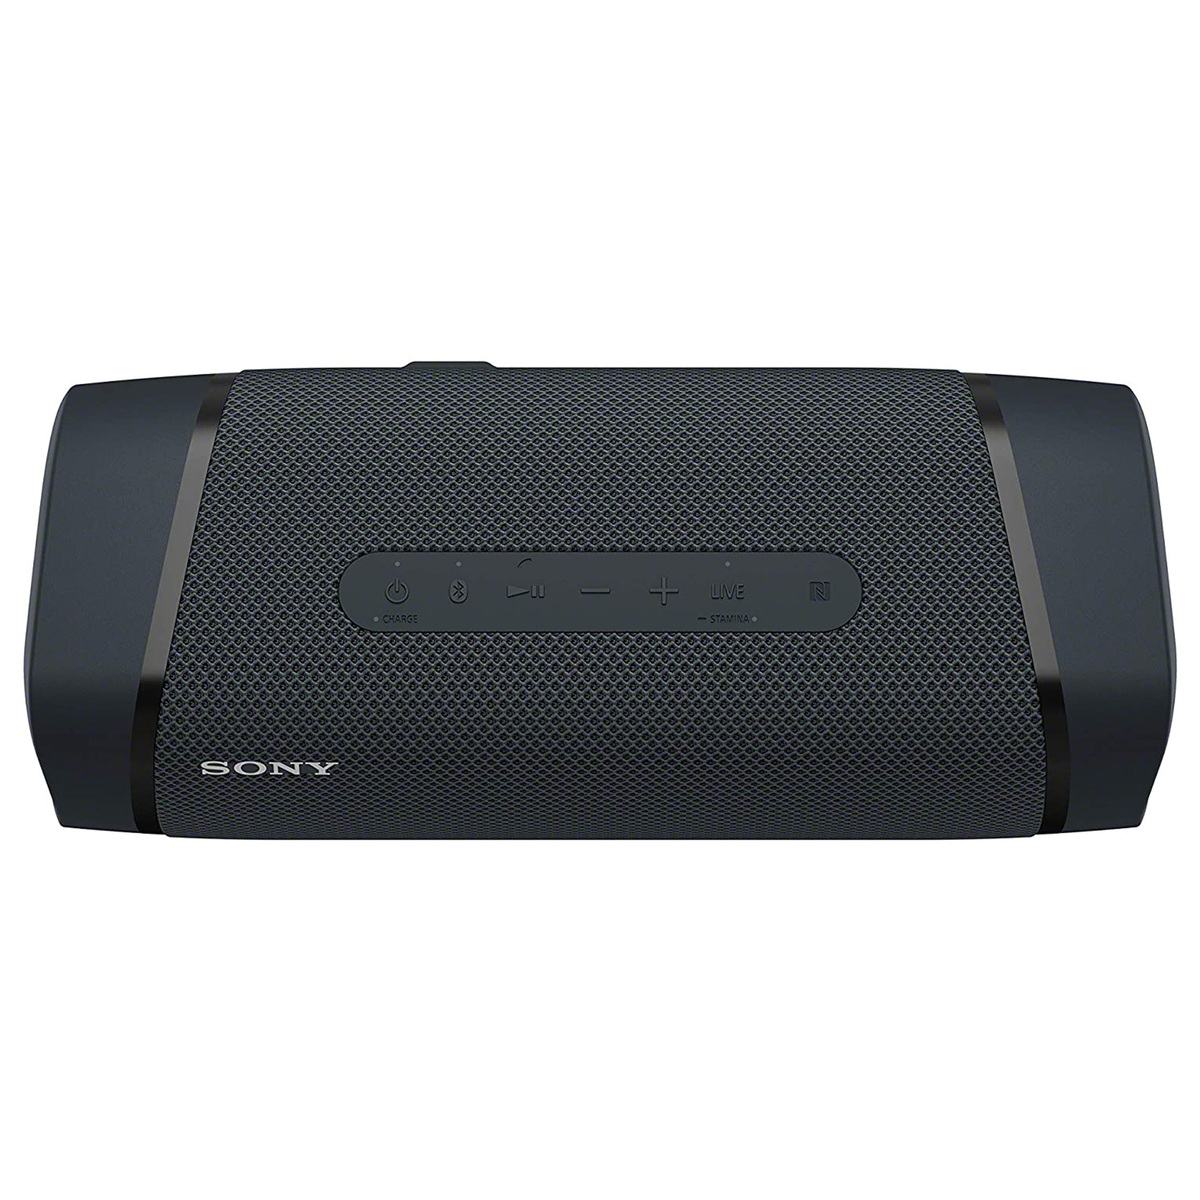 Sony SRS-XB33 EXTRA BASS Wireless Portable Speaker IP67 Waterproof Bluetooth and Built In Mic for Phone Calls, Black (SRSXB33/B)